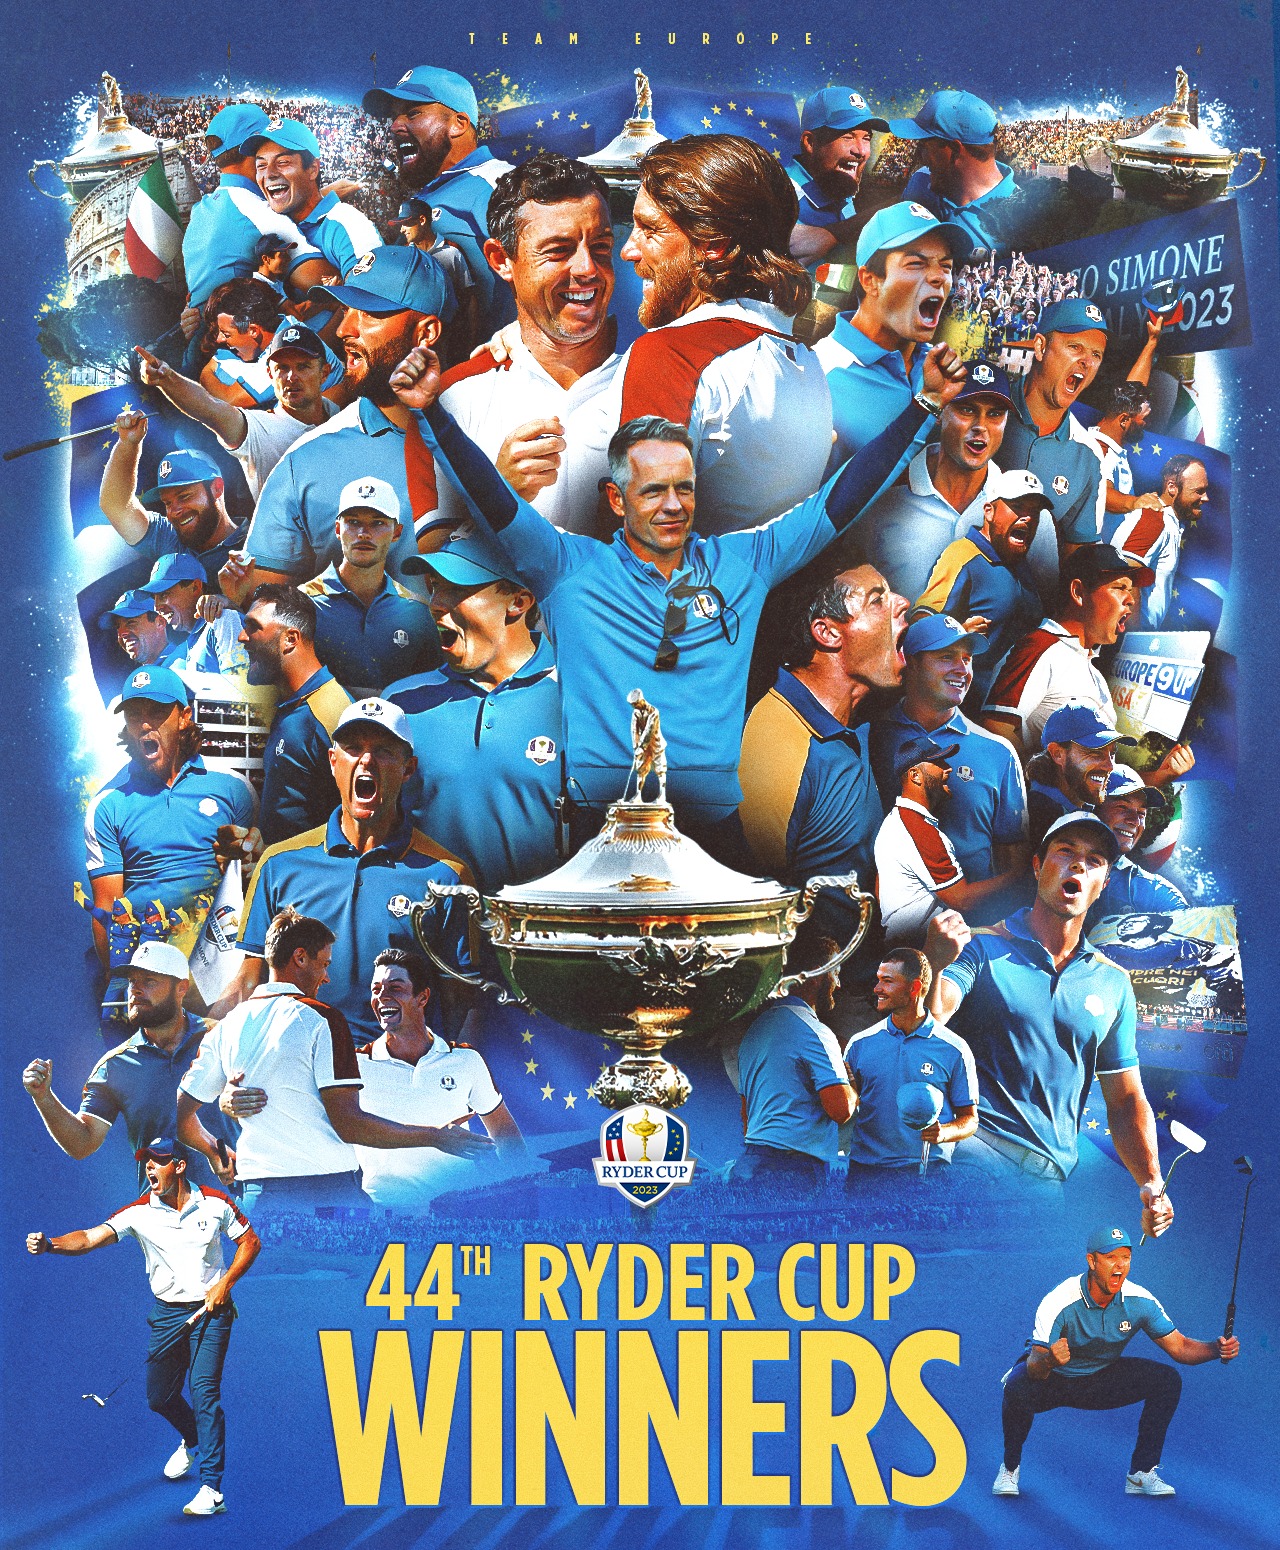 Ryder Cup 2023
Photo by Ryder Cup Team Europe on Facebook